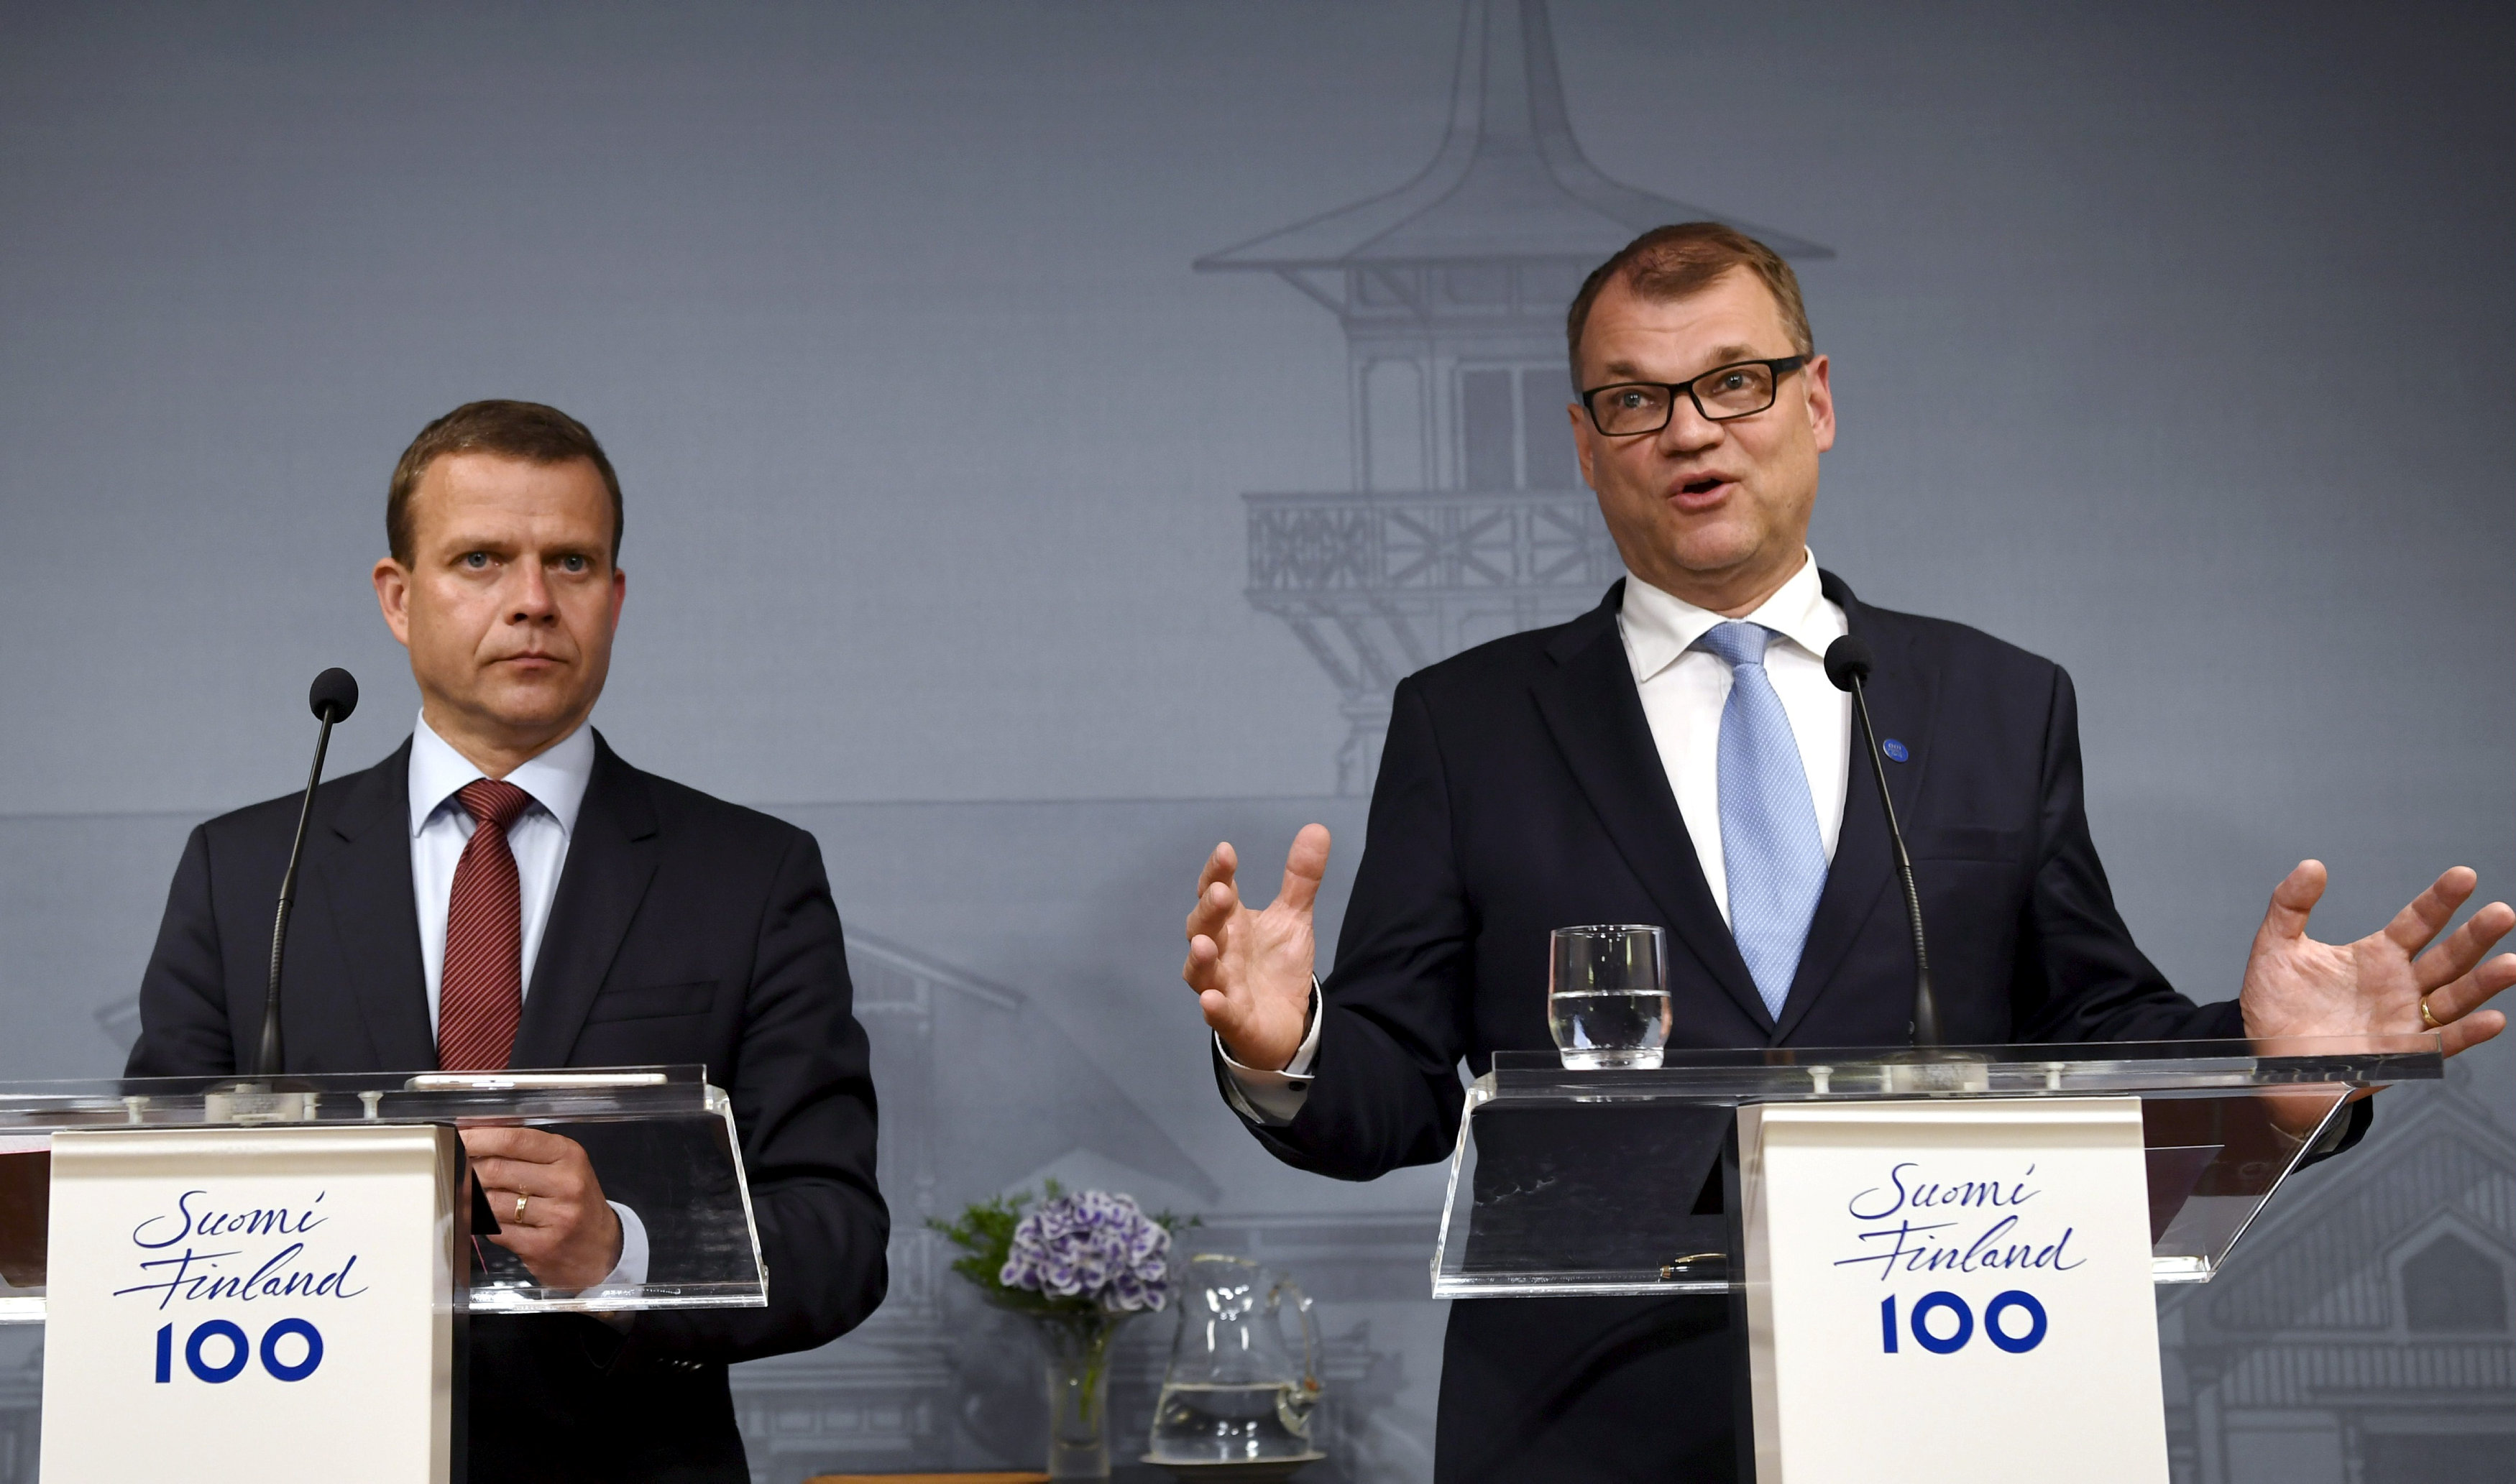 Finnish PM Sipila moves to break up coalition, kick out nationalists